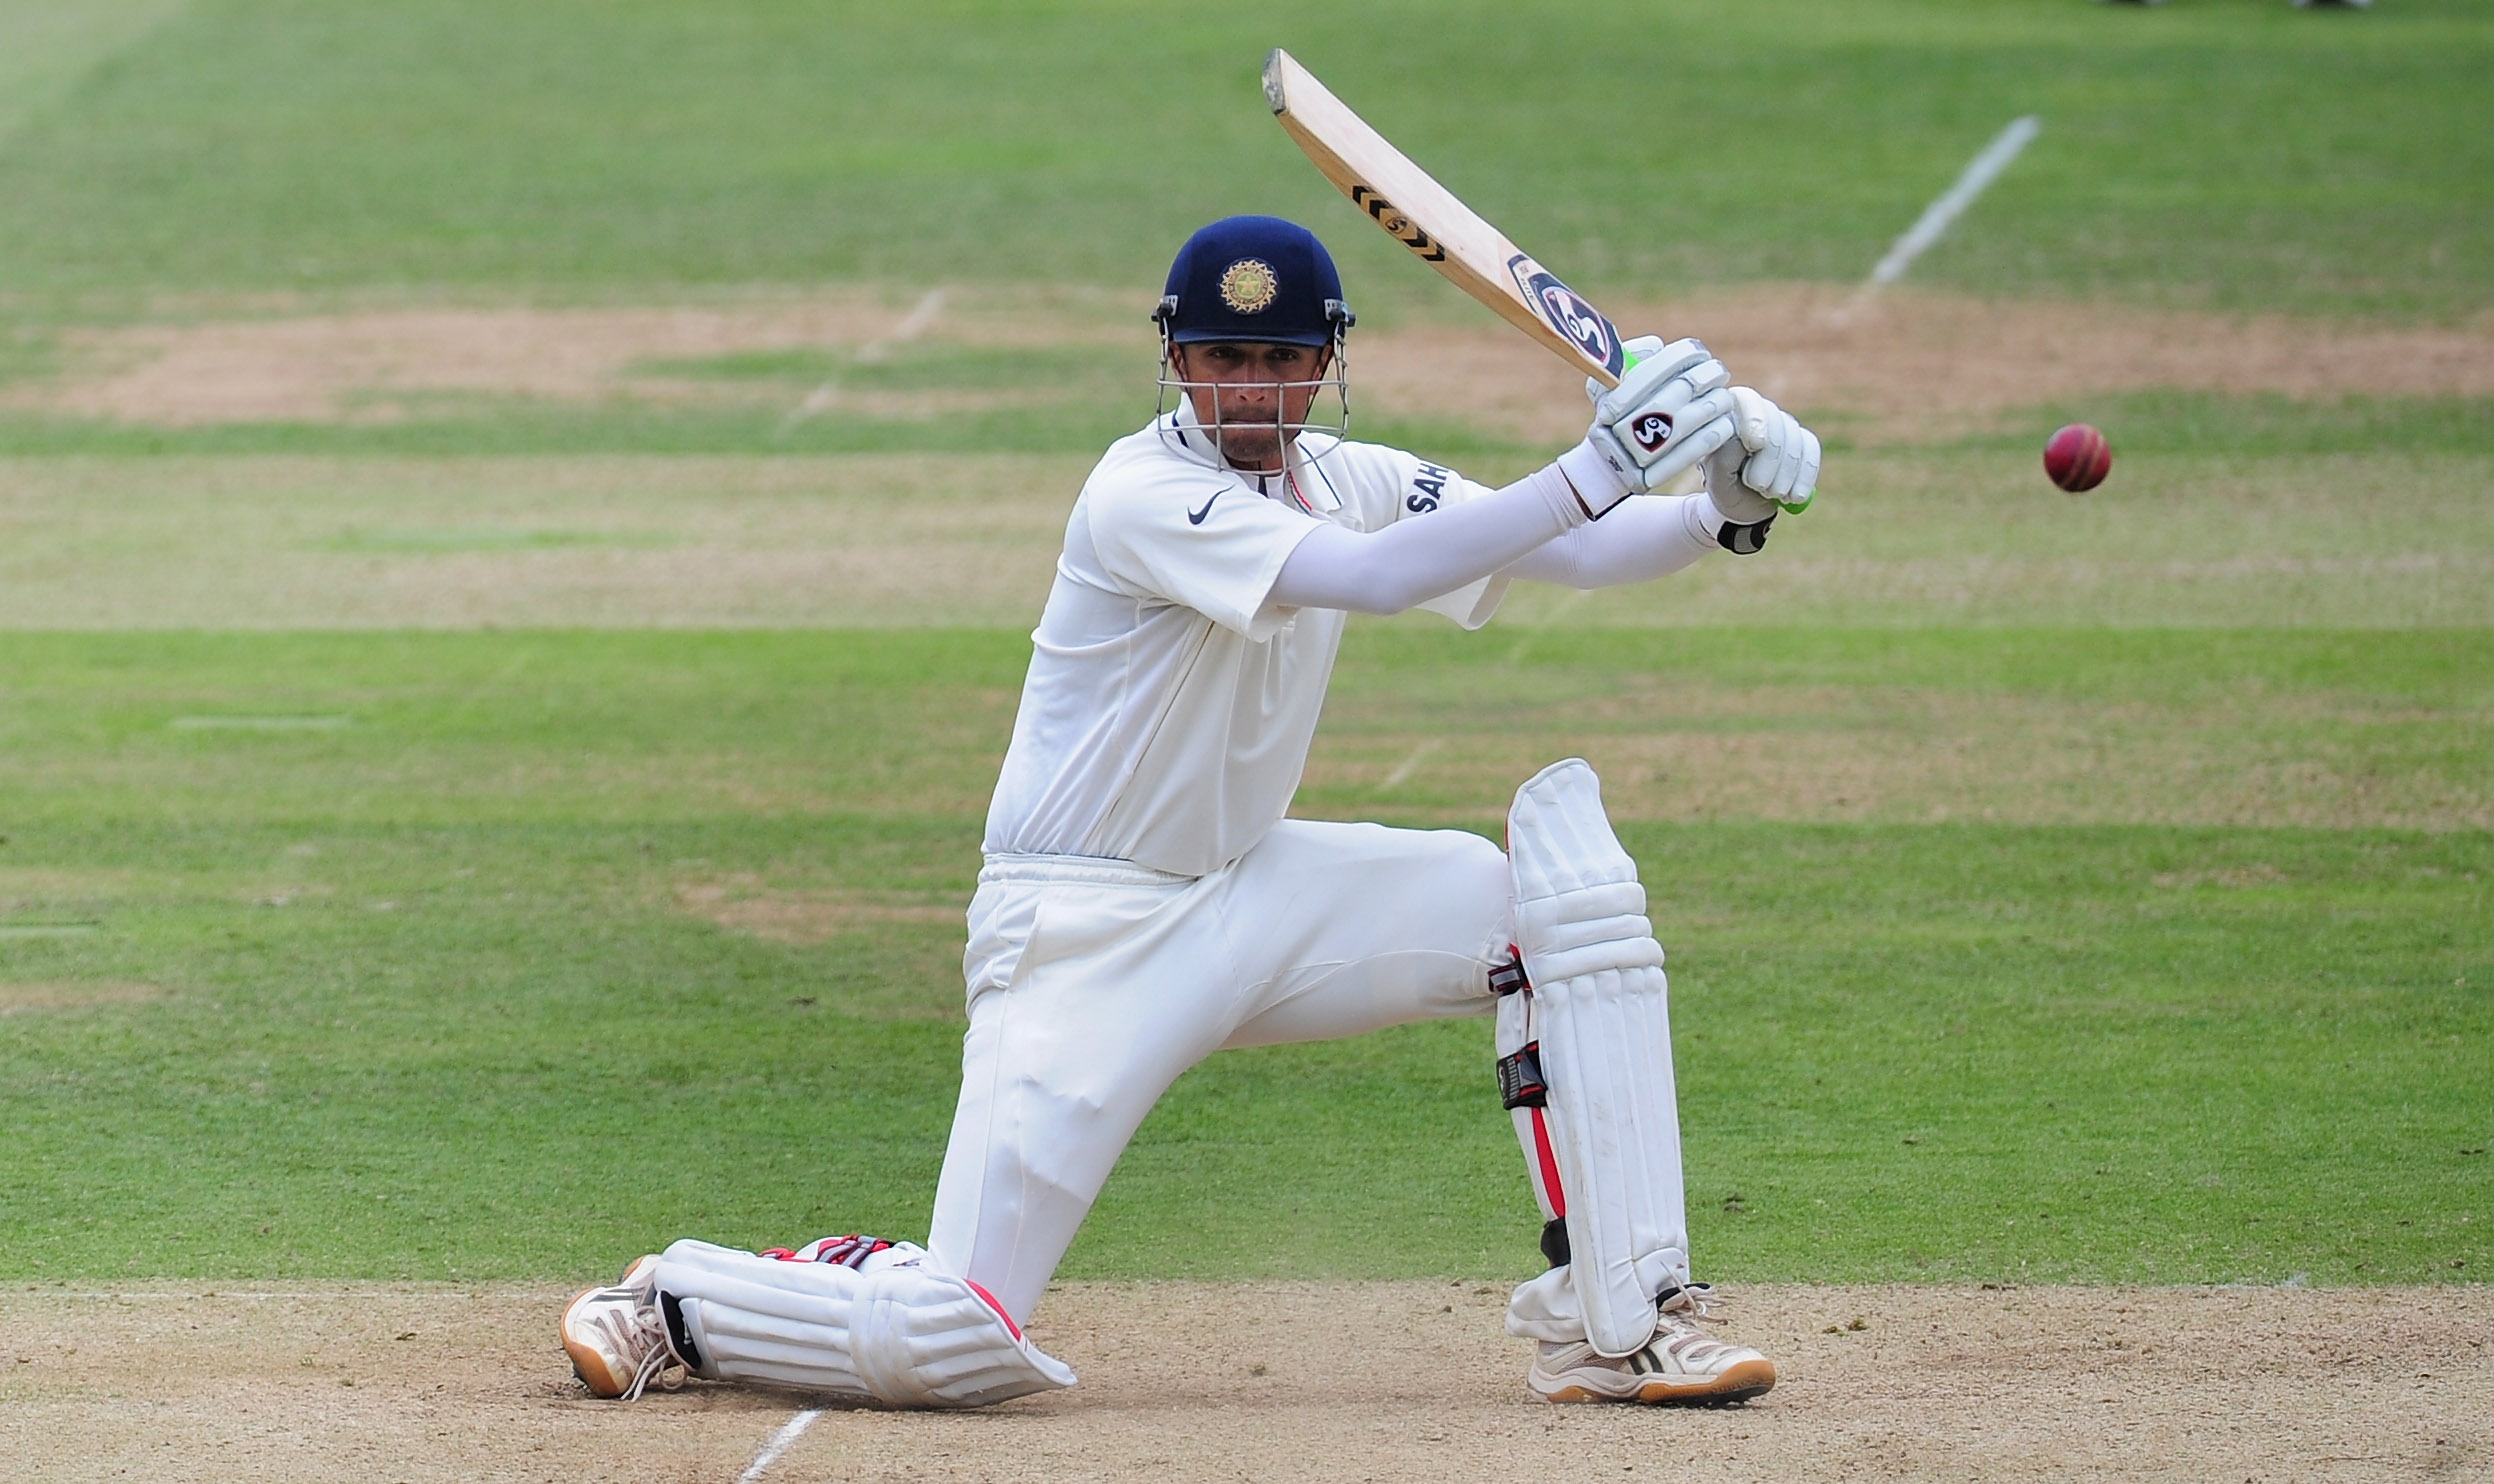 Defensive batting is a ‘fair assessment’ of my style, admits Rahul Dravid